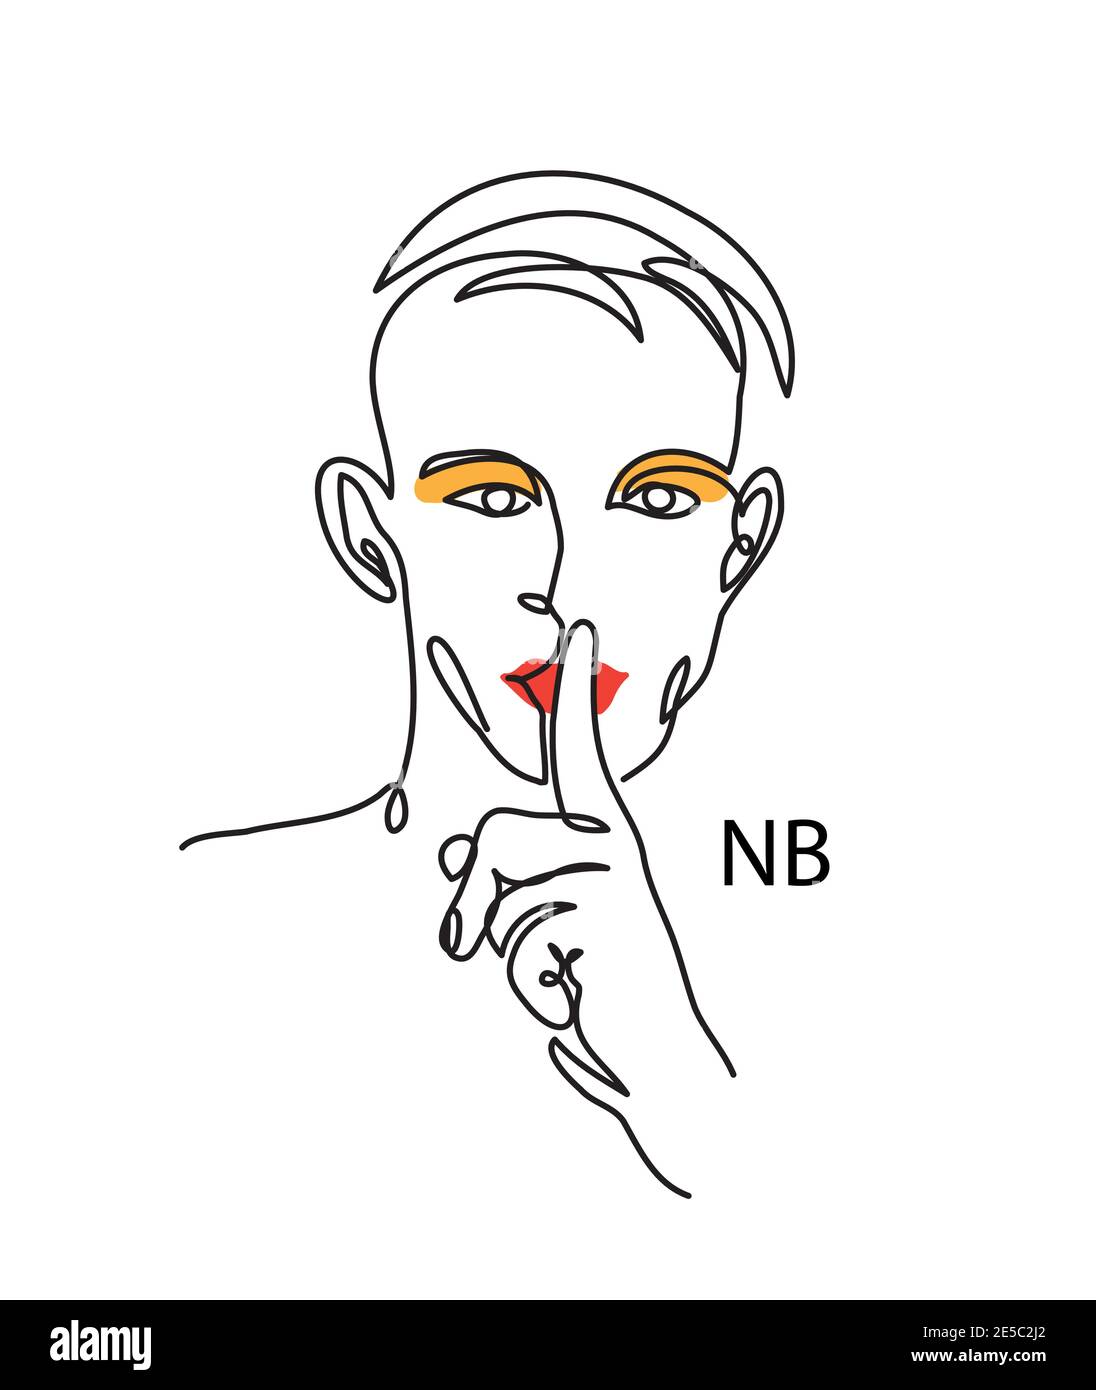 Nonbinary, enby, NB person concept. Man with make up and shh gesture. Simple vector illustration, man face line art. Stock Vector